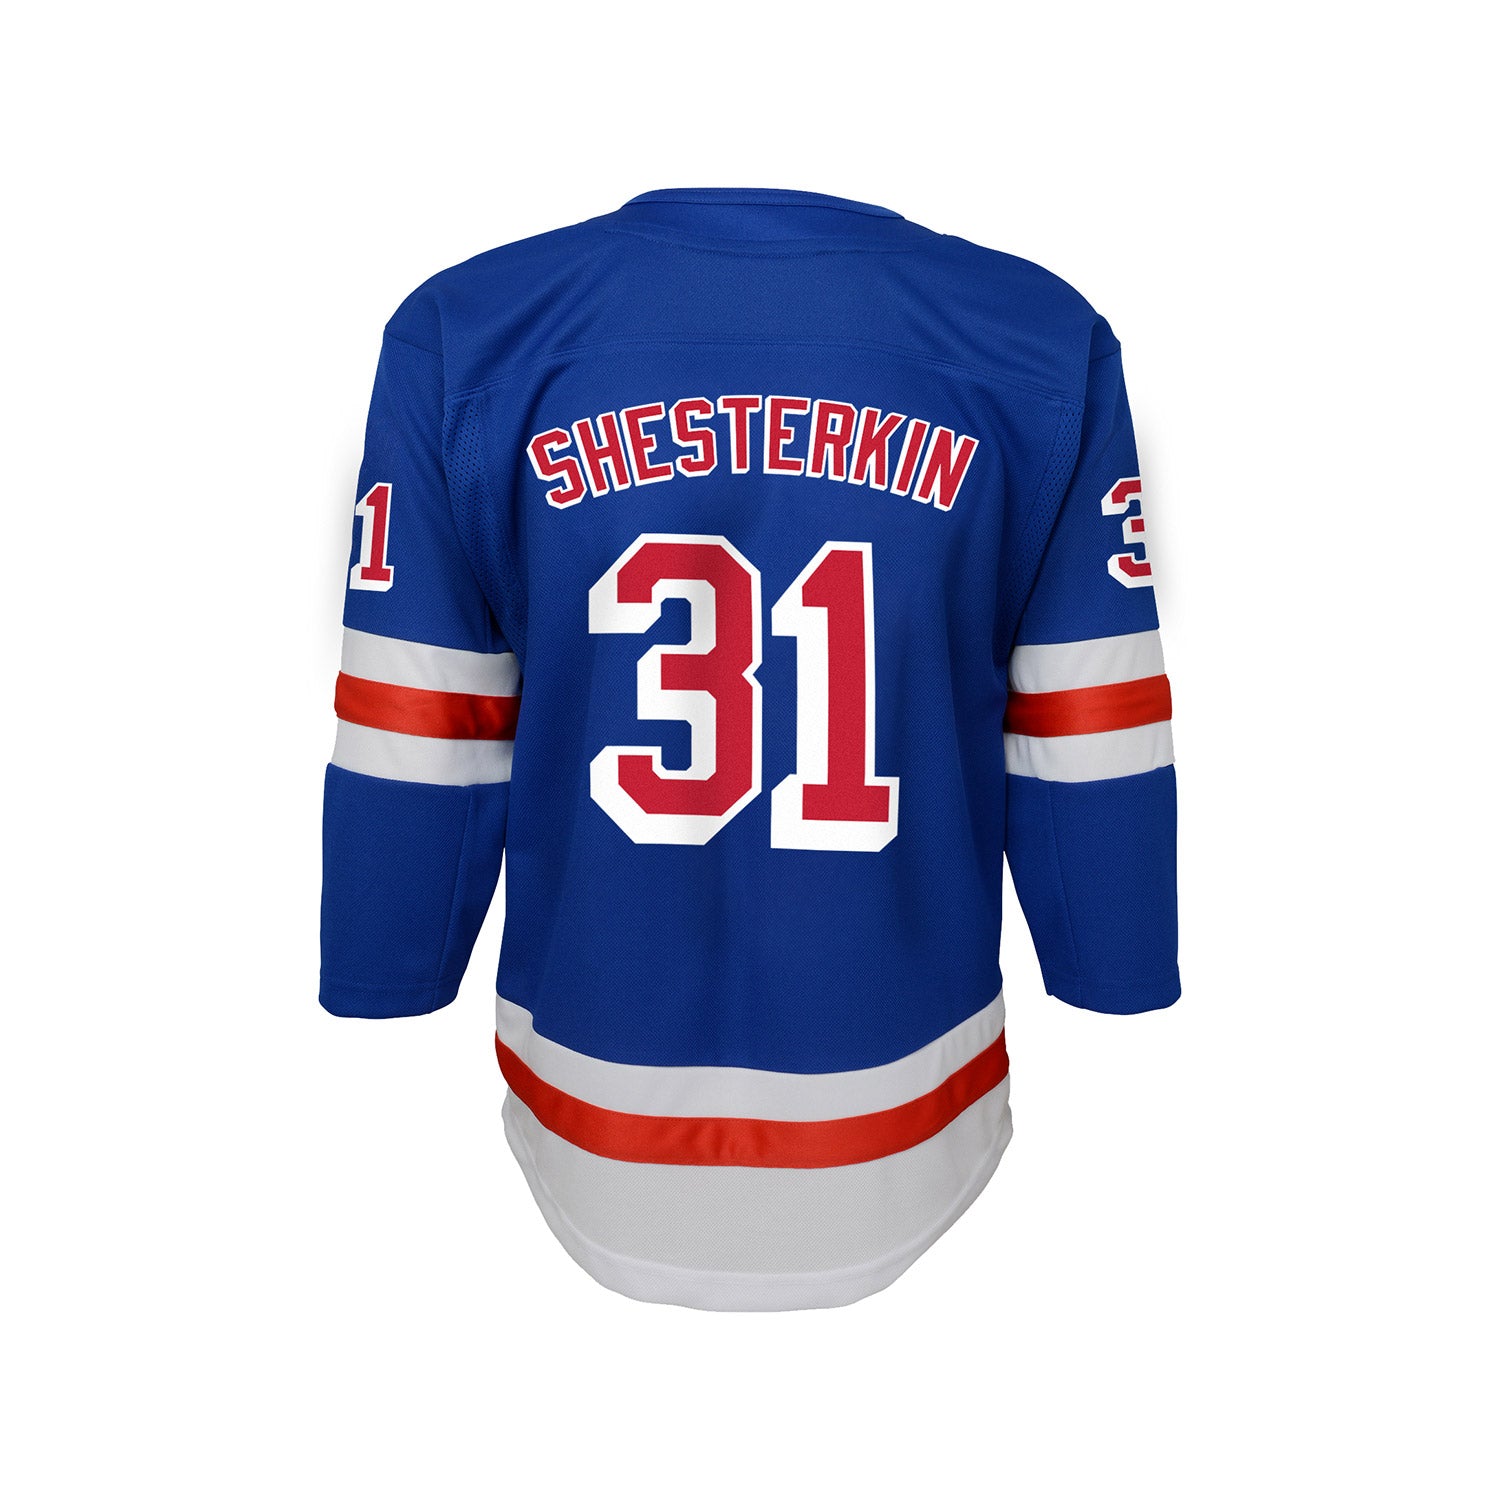 shesterkin youth jersey